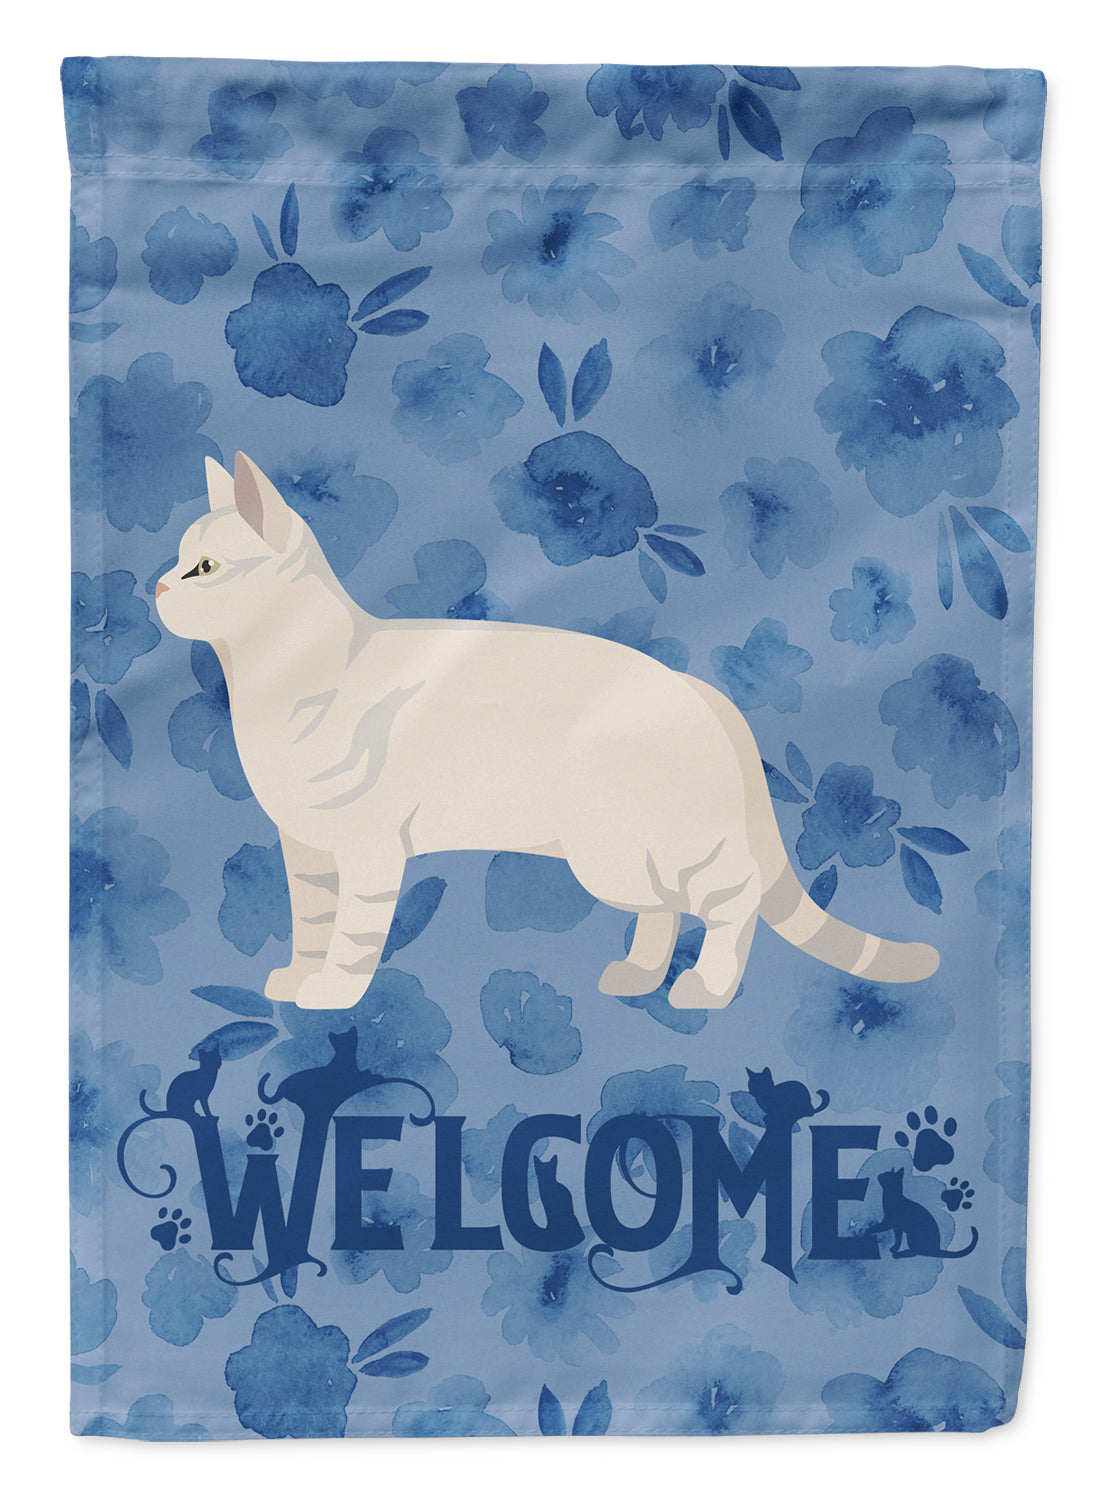 American Shorthair #2 Cat Welcome Flag Garden Size CK4821GF  the-store.com.